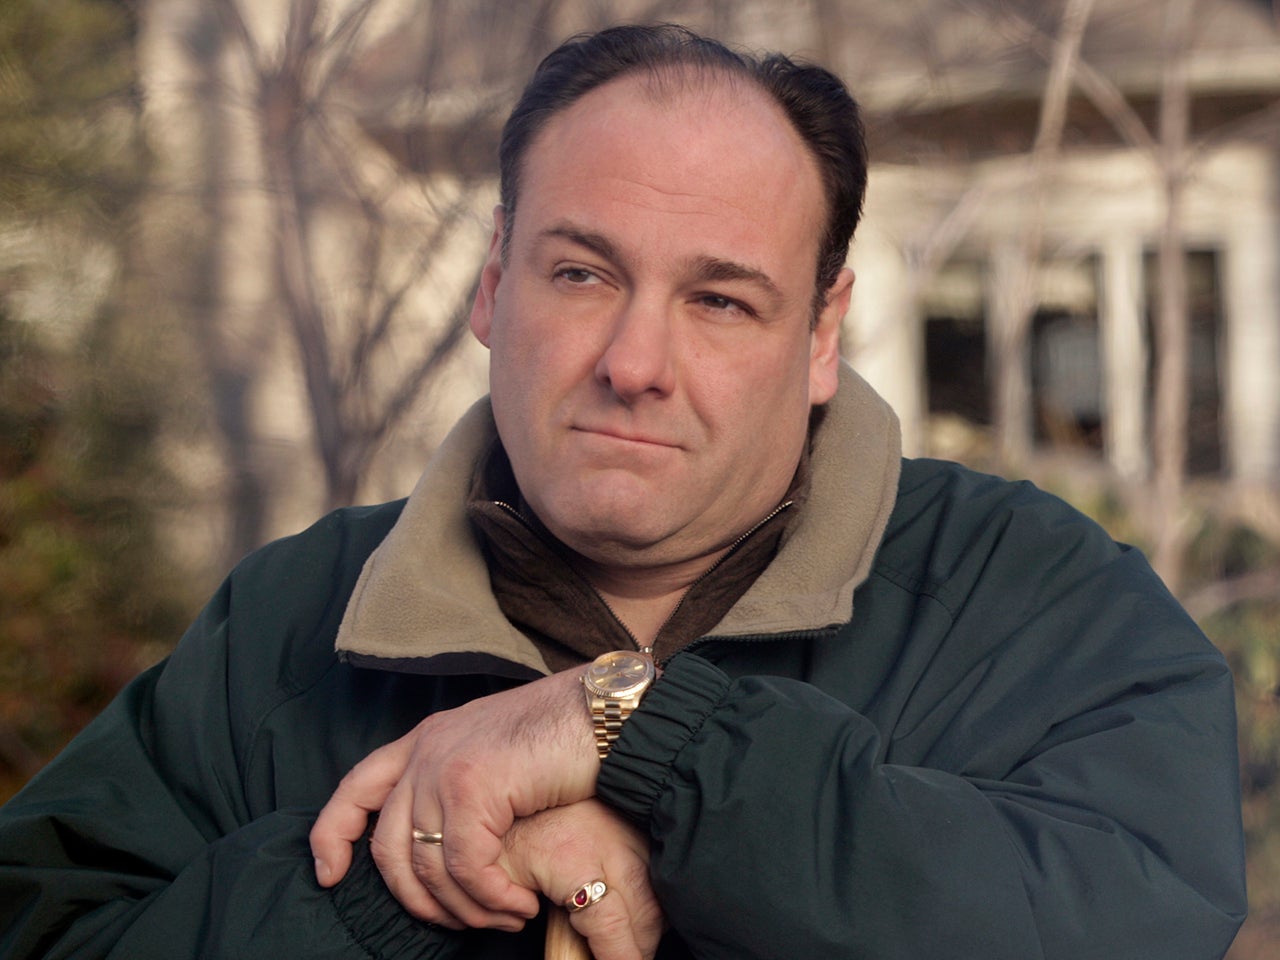 The iconic actor had his debut in True Romance in 1993 and then went on to play the lead role in HBO drama The Sopranos